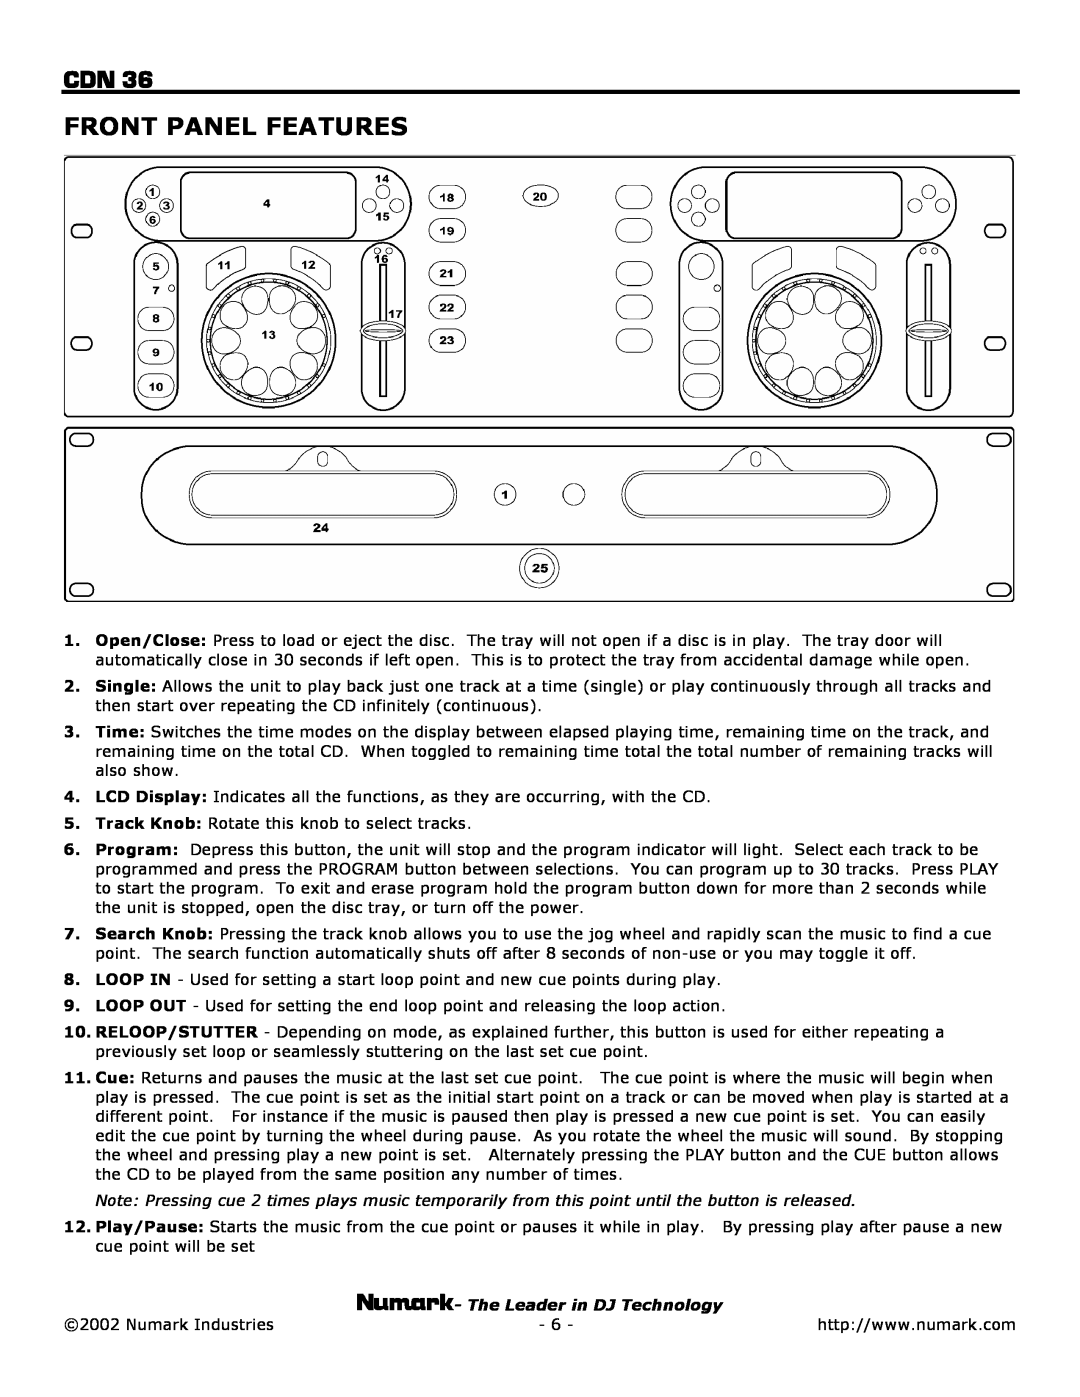 Numark Industries CDN 36 owner manual Front Panel Features 